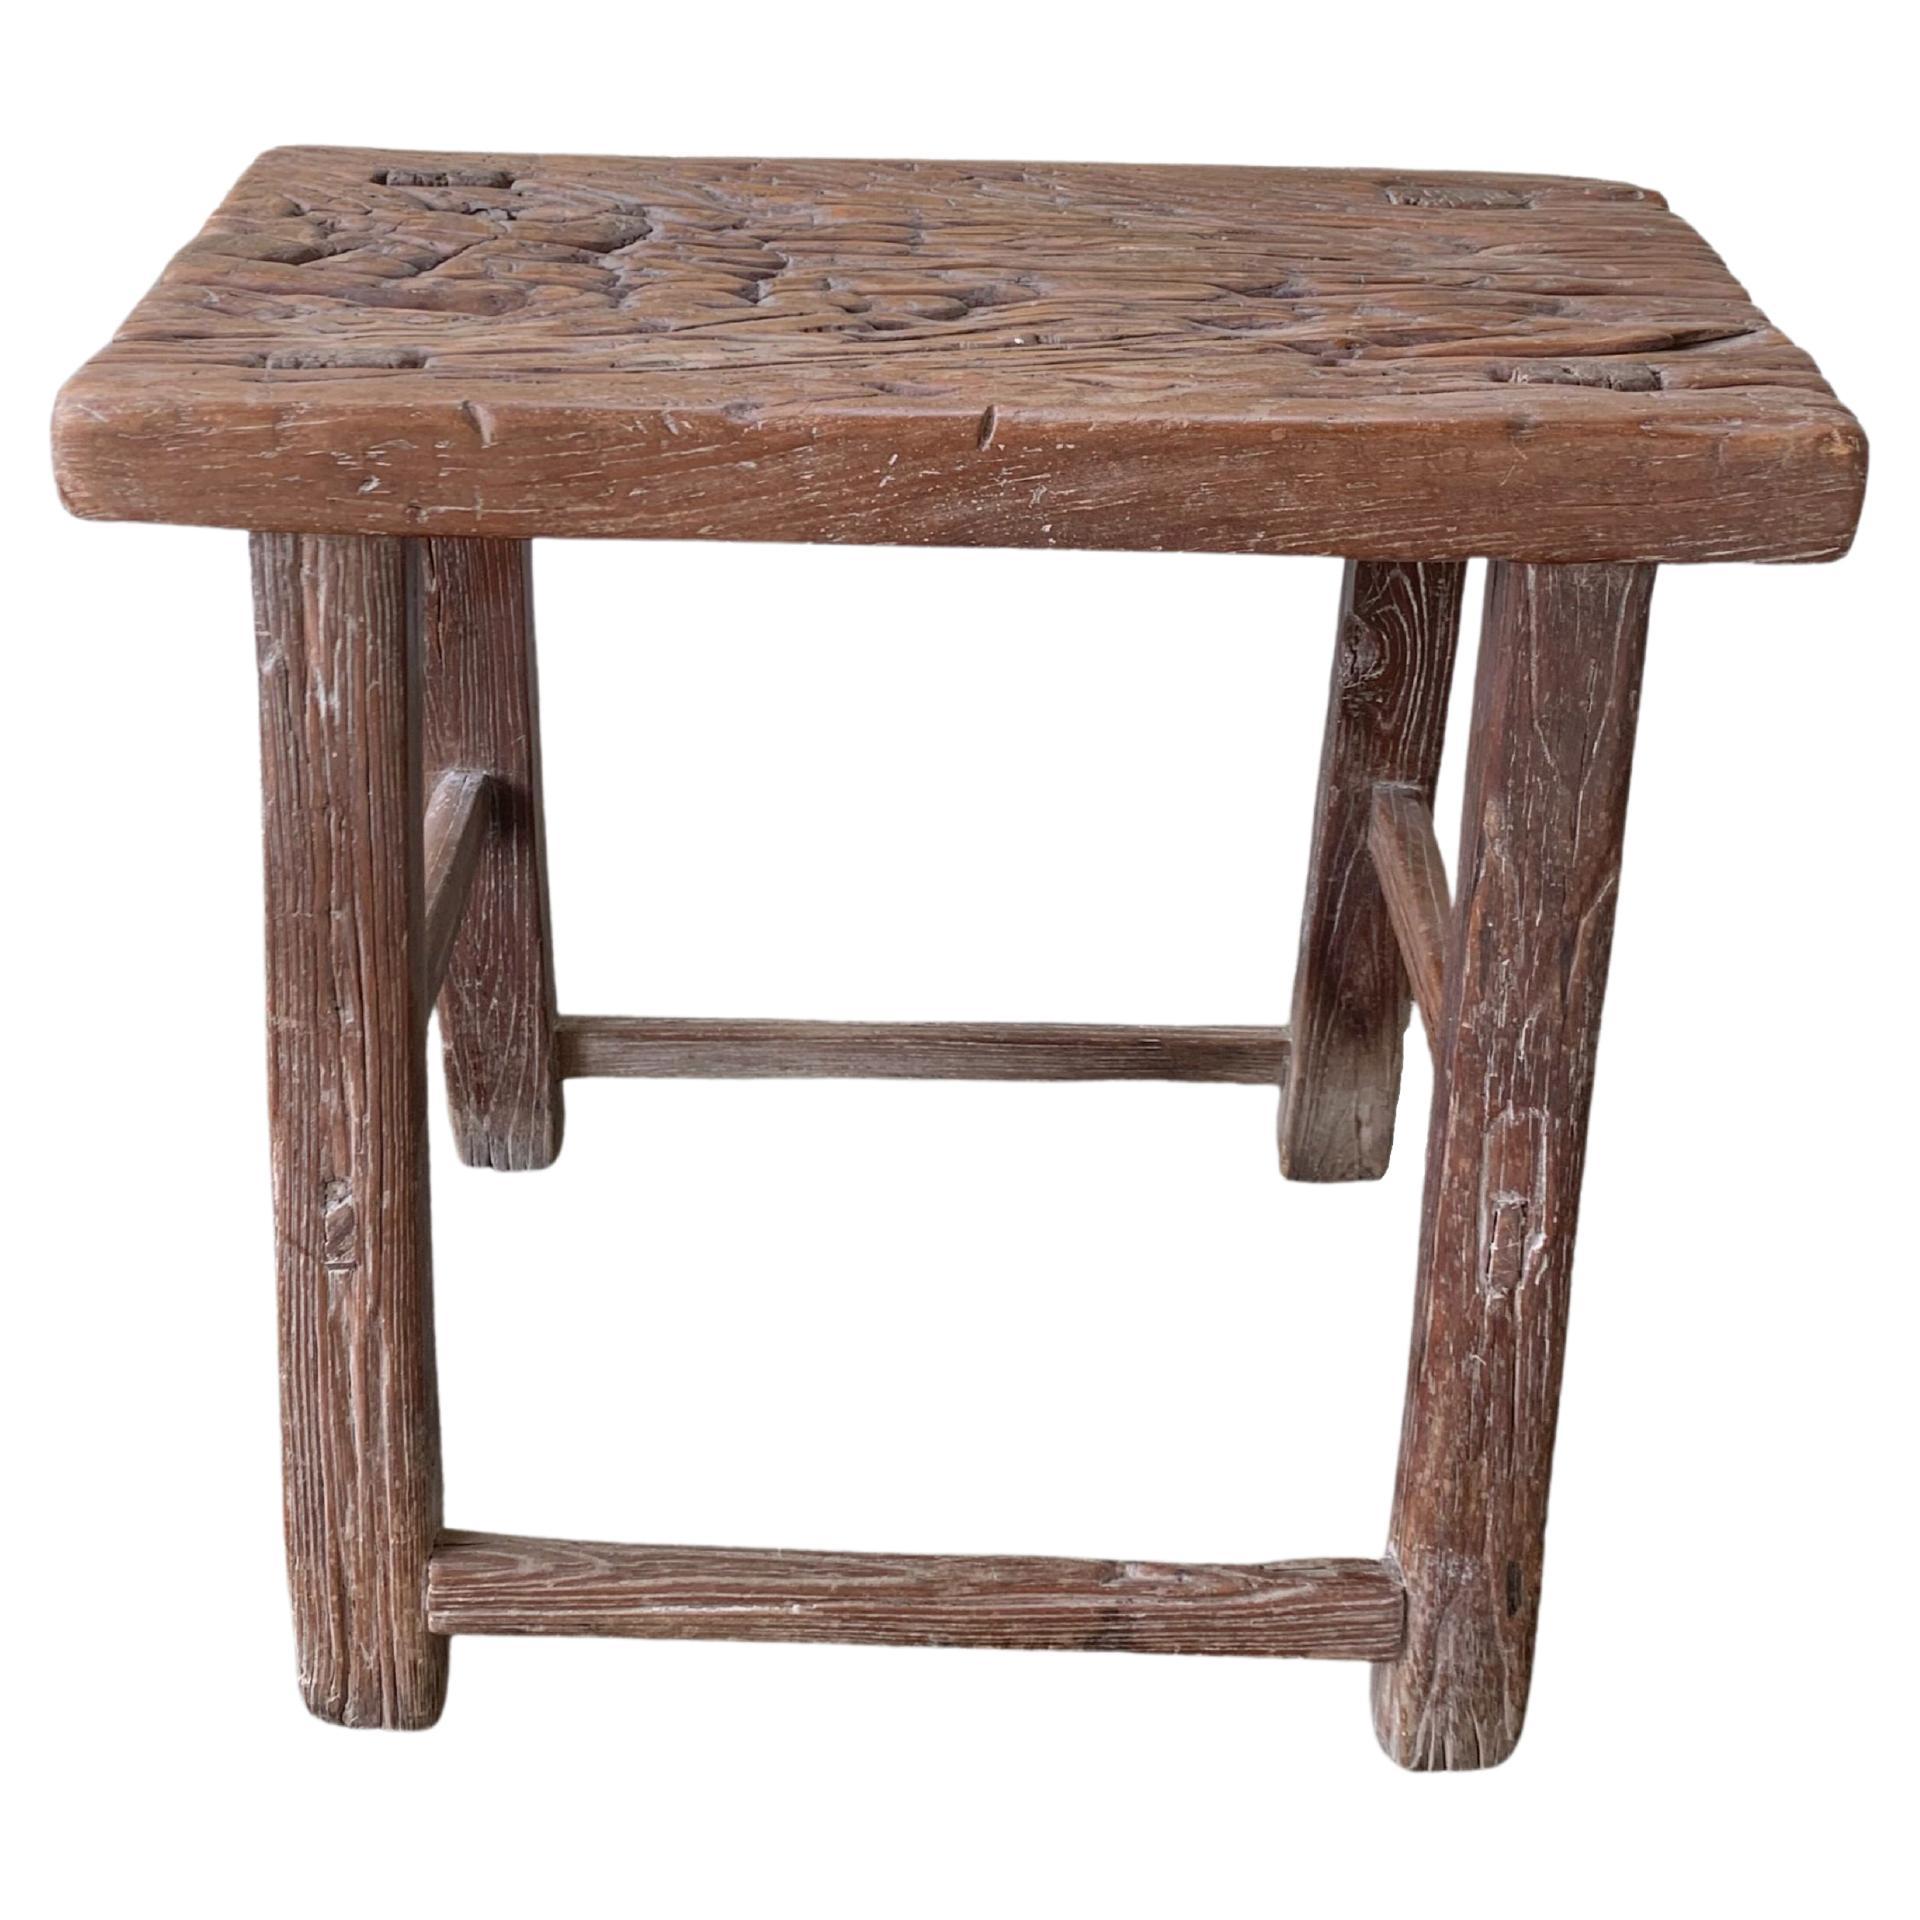 Antique Chinese Elm Wood Stool, Early 20th Century